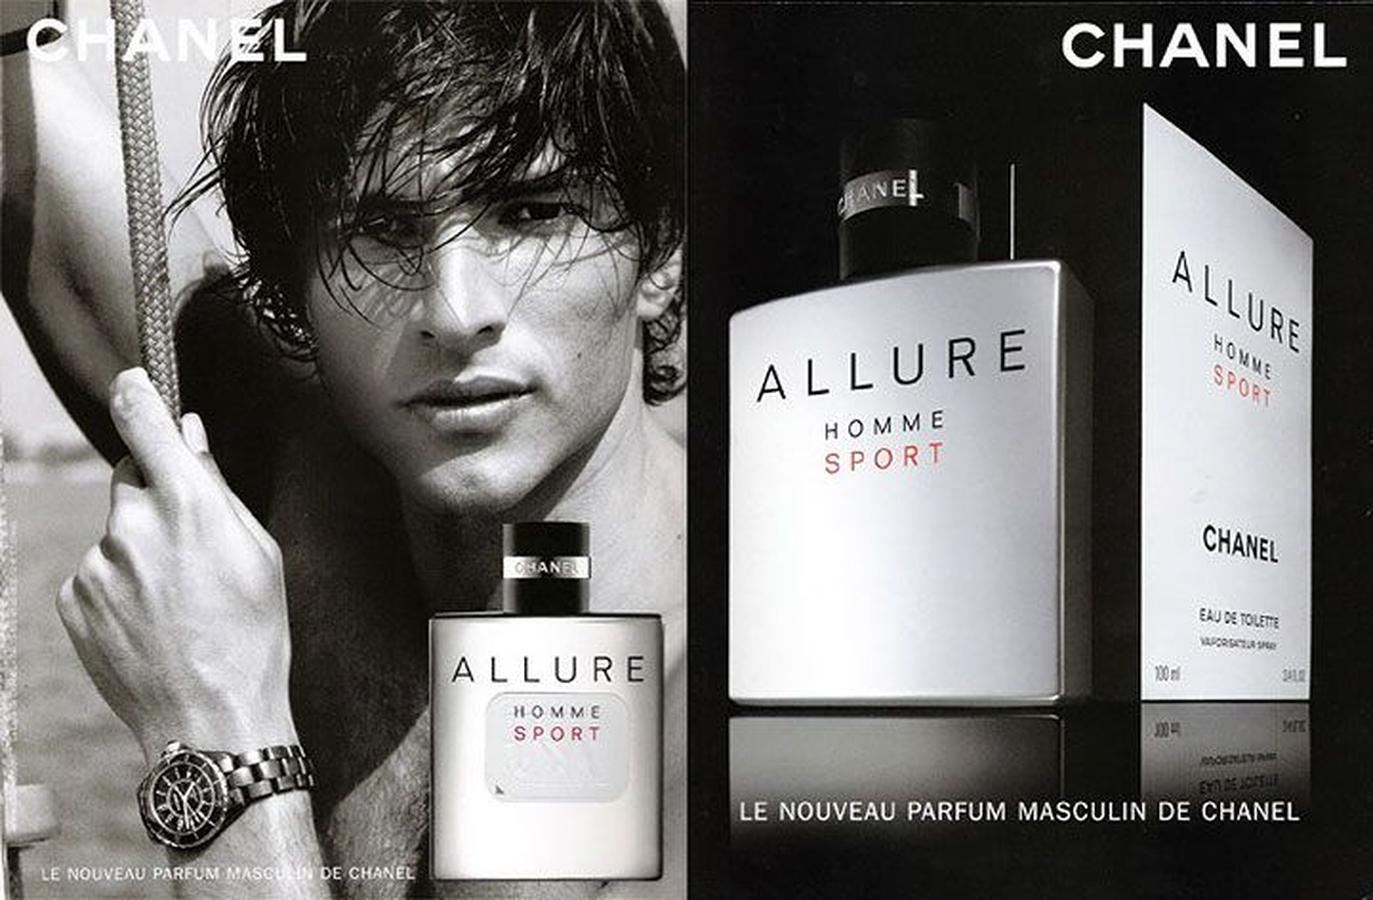 Home sport 1. Chanel Allure homme Sport 100ml EDT men. Chanel Allure homme Sport. Chanel Allure Sport men 100ml. Chanel Allure homme Sport 100ml.